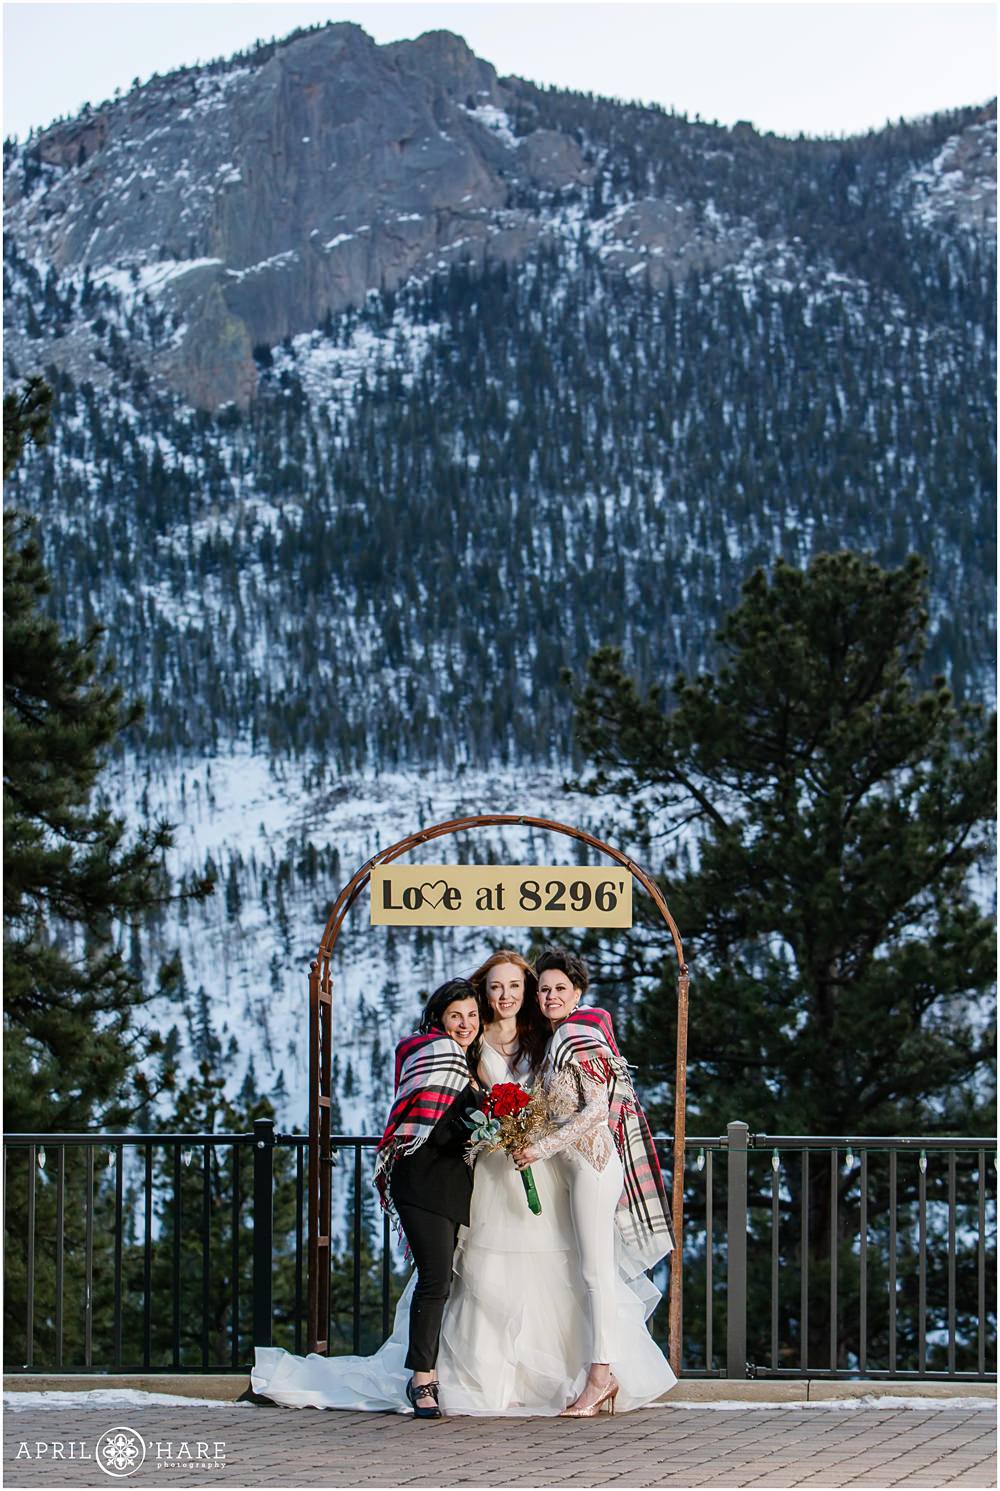 Two brides and their officiant aunt pose under the Love at 8296 arch at Della Terra Mountain Chateau